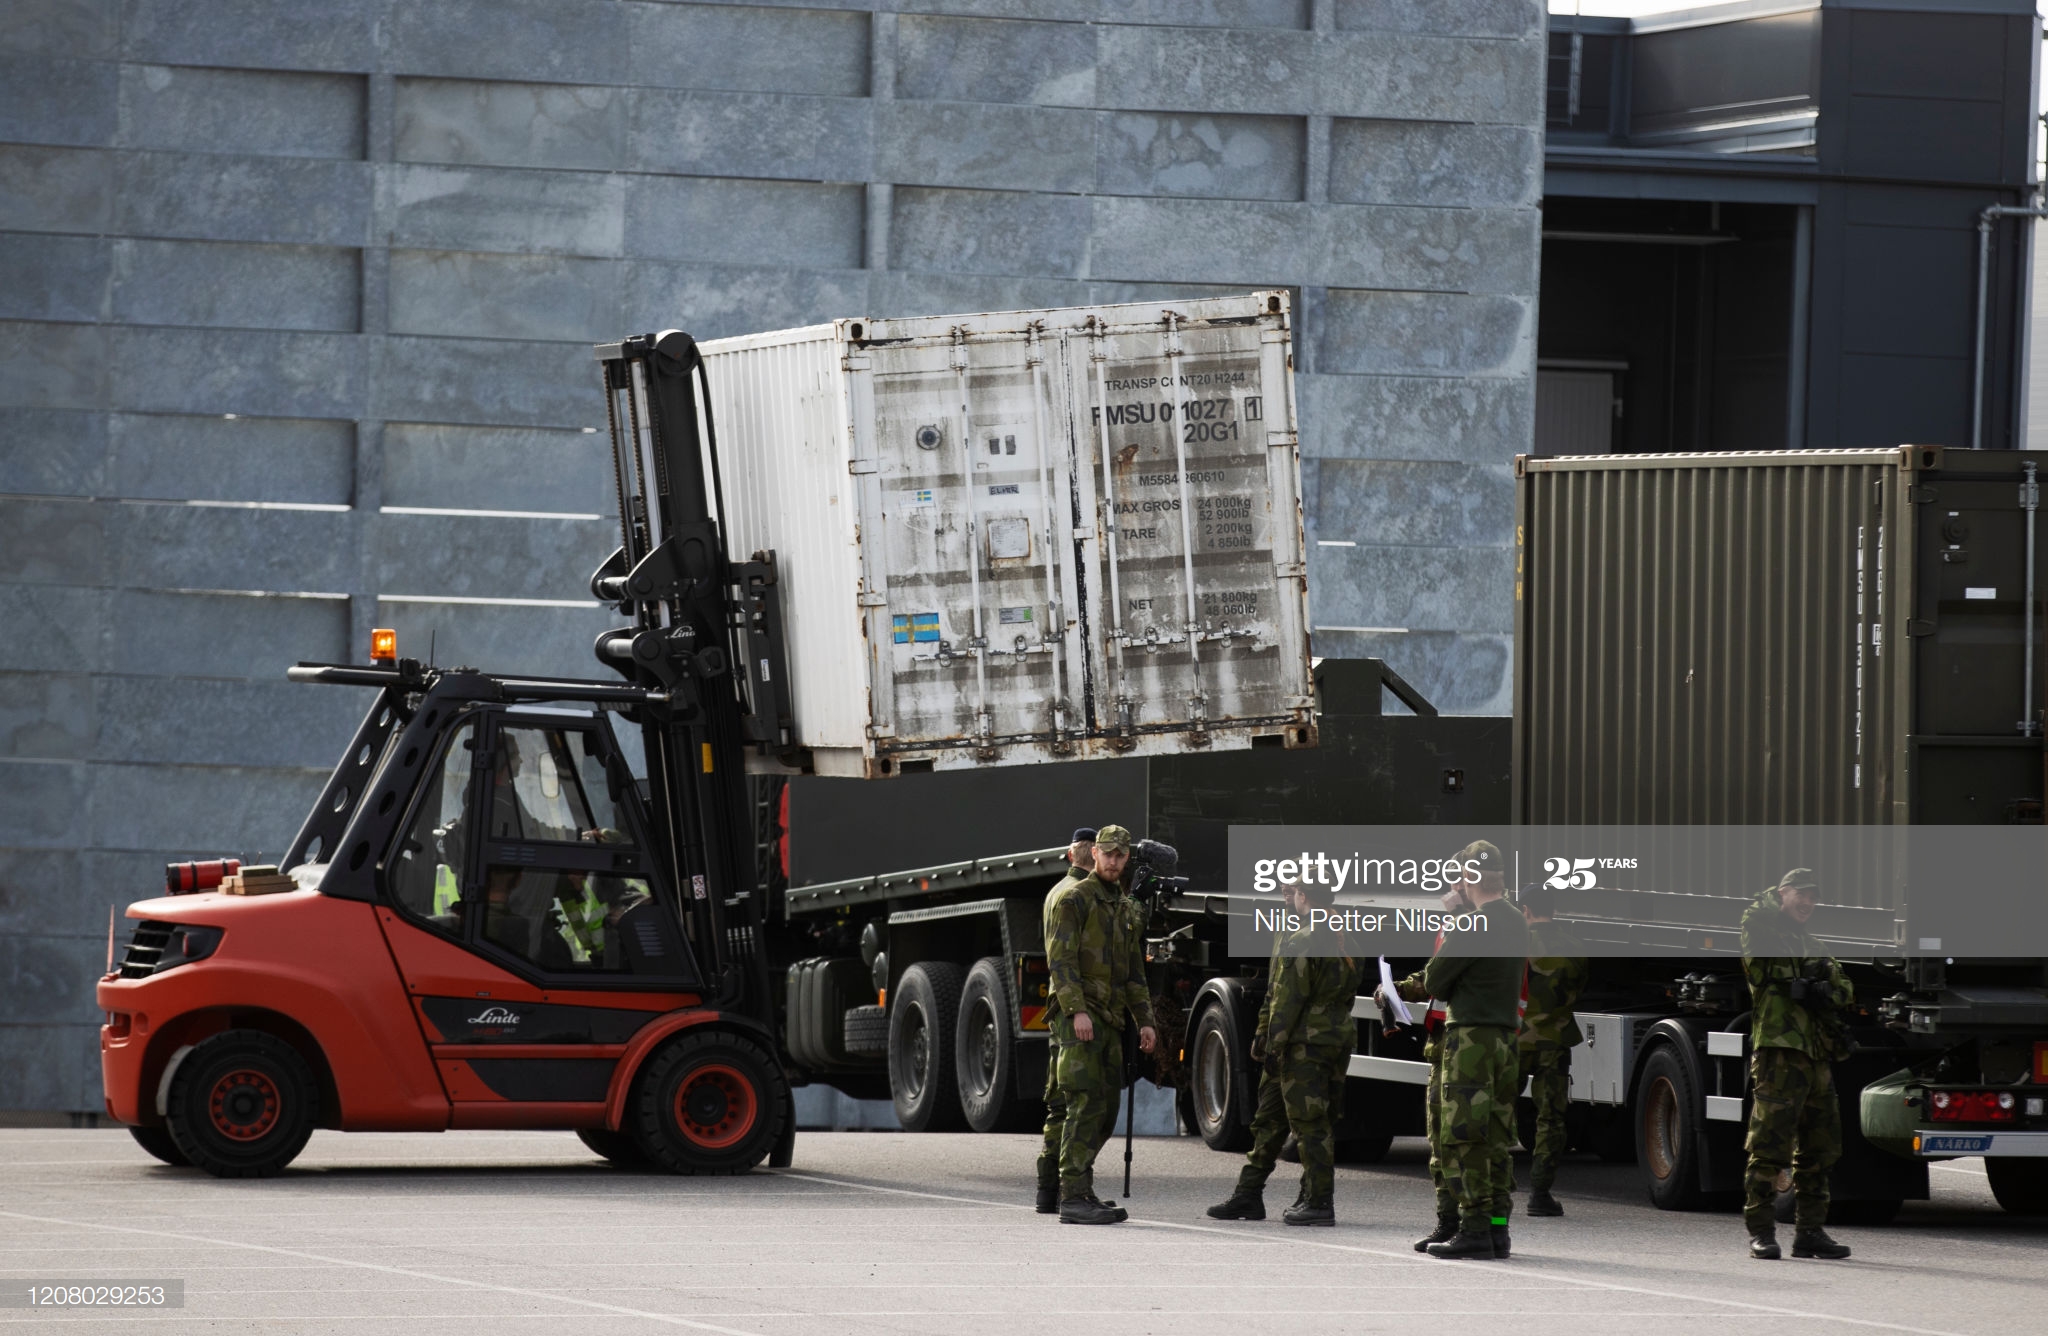 trucks-arrive-as-the-swedish-military-builds-a-field-hospital-at-picture-id1208029253